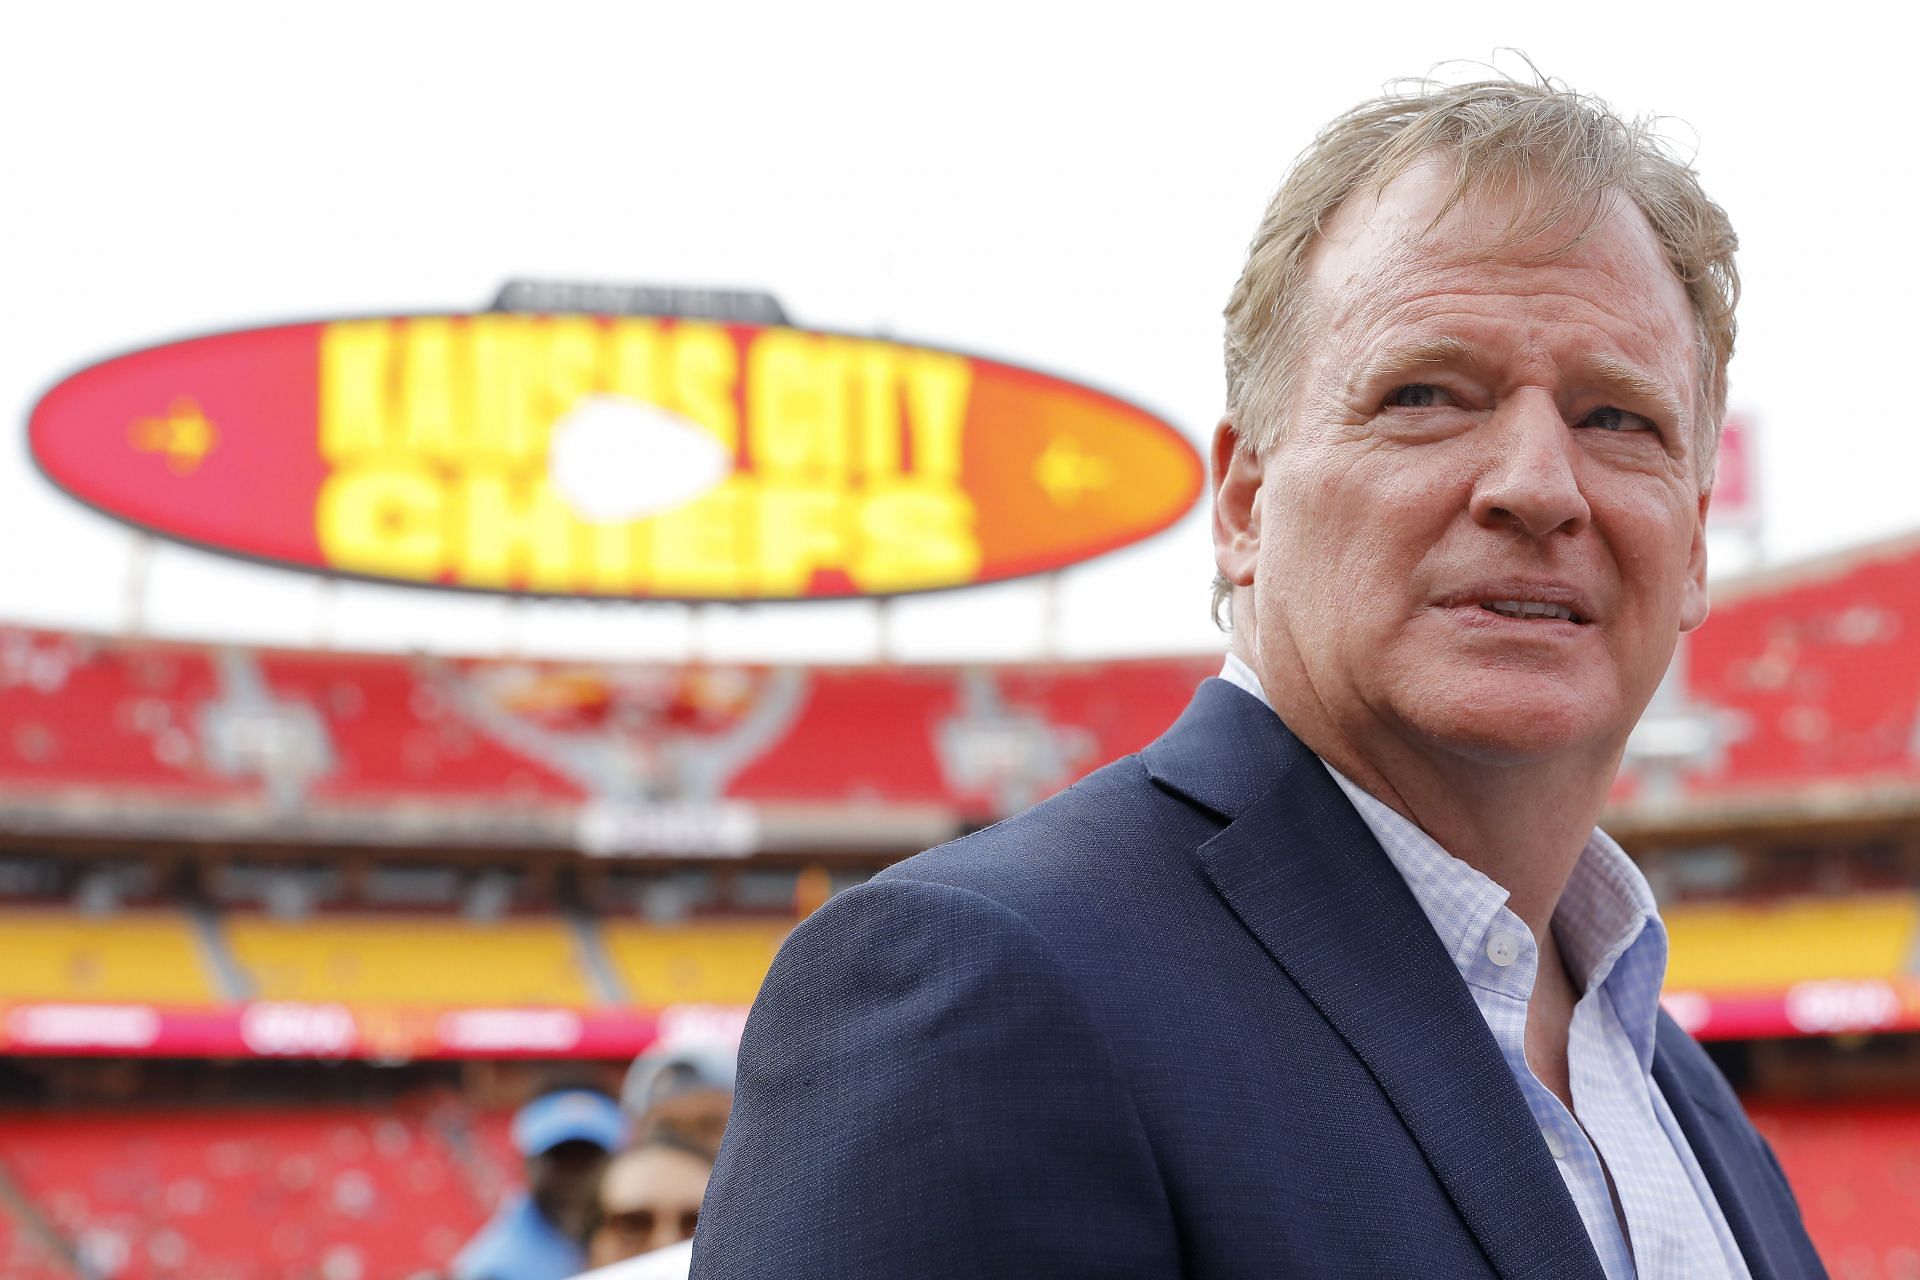 Roger Goodell is determined that the NFL become more youth-friendly